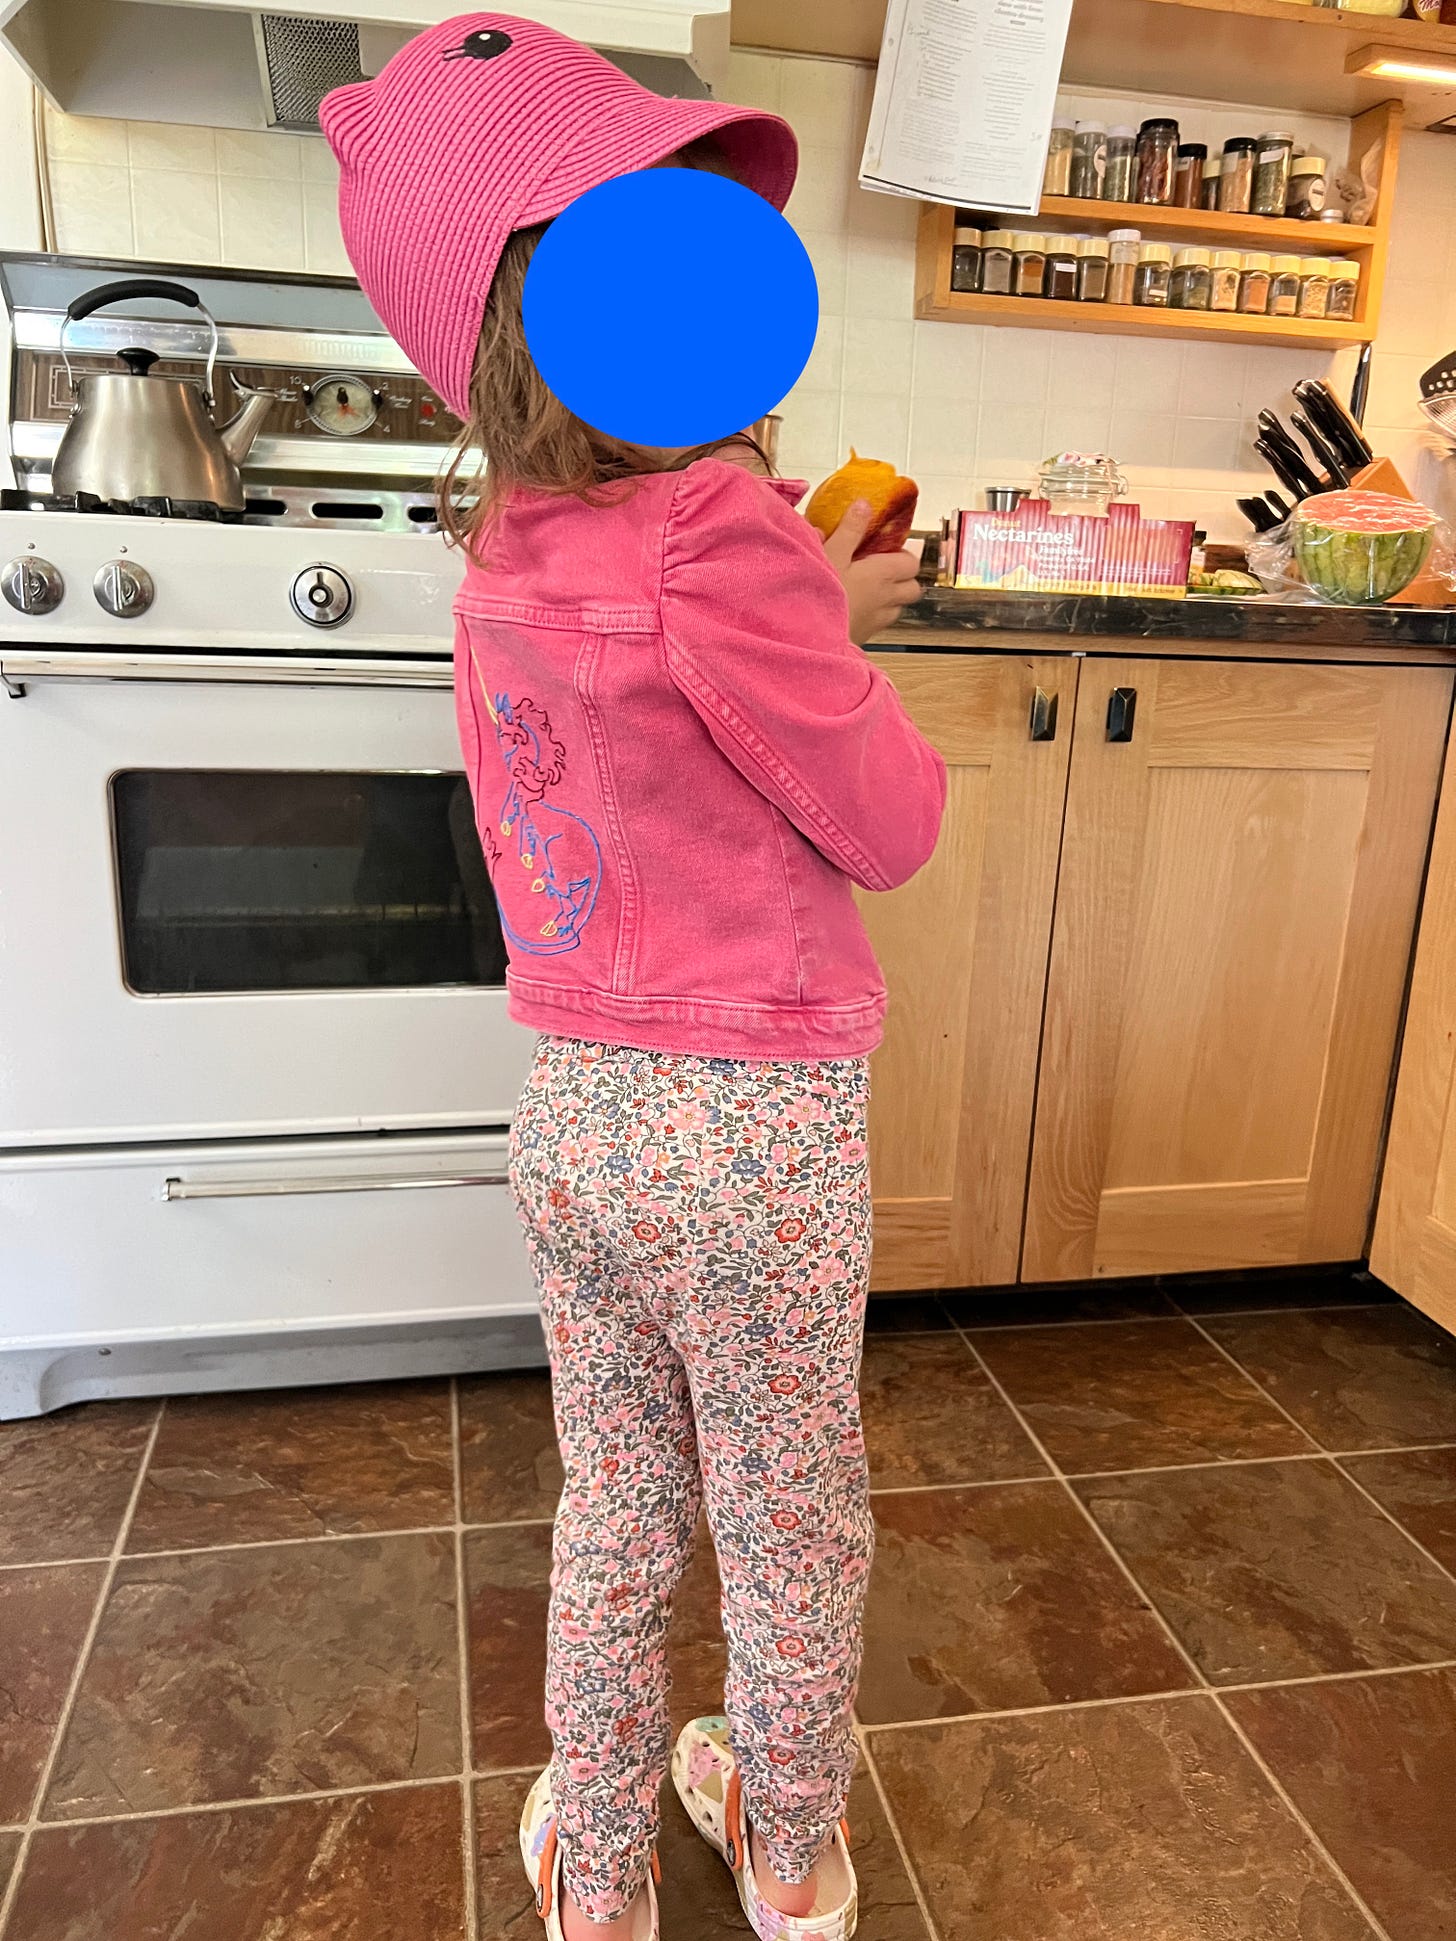 Photo of a five-year-old wearing a pink denim jacket with a unicorn embroidered on the hat. They are also wearing a pink 'cat' hat with little ears and cartoon eyes and flowery pink PJs